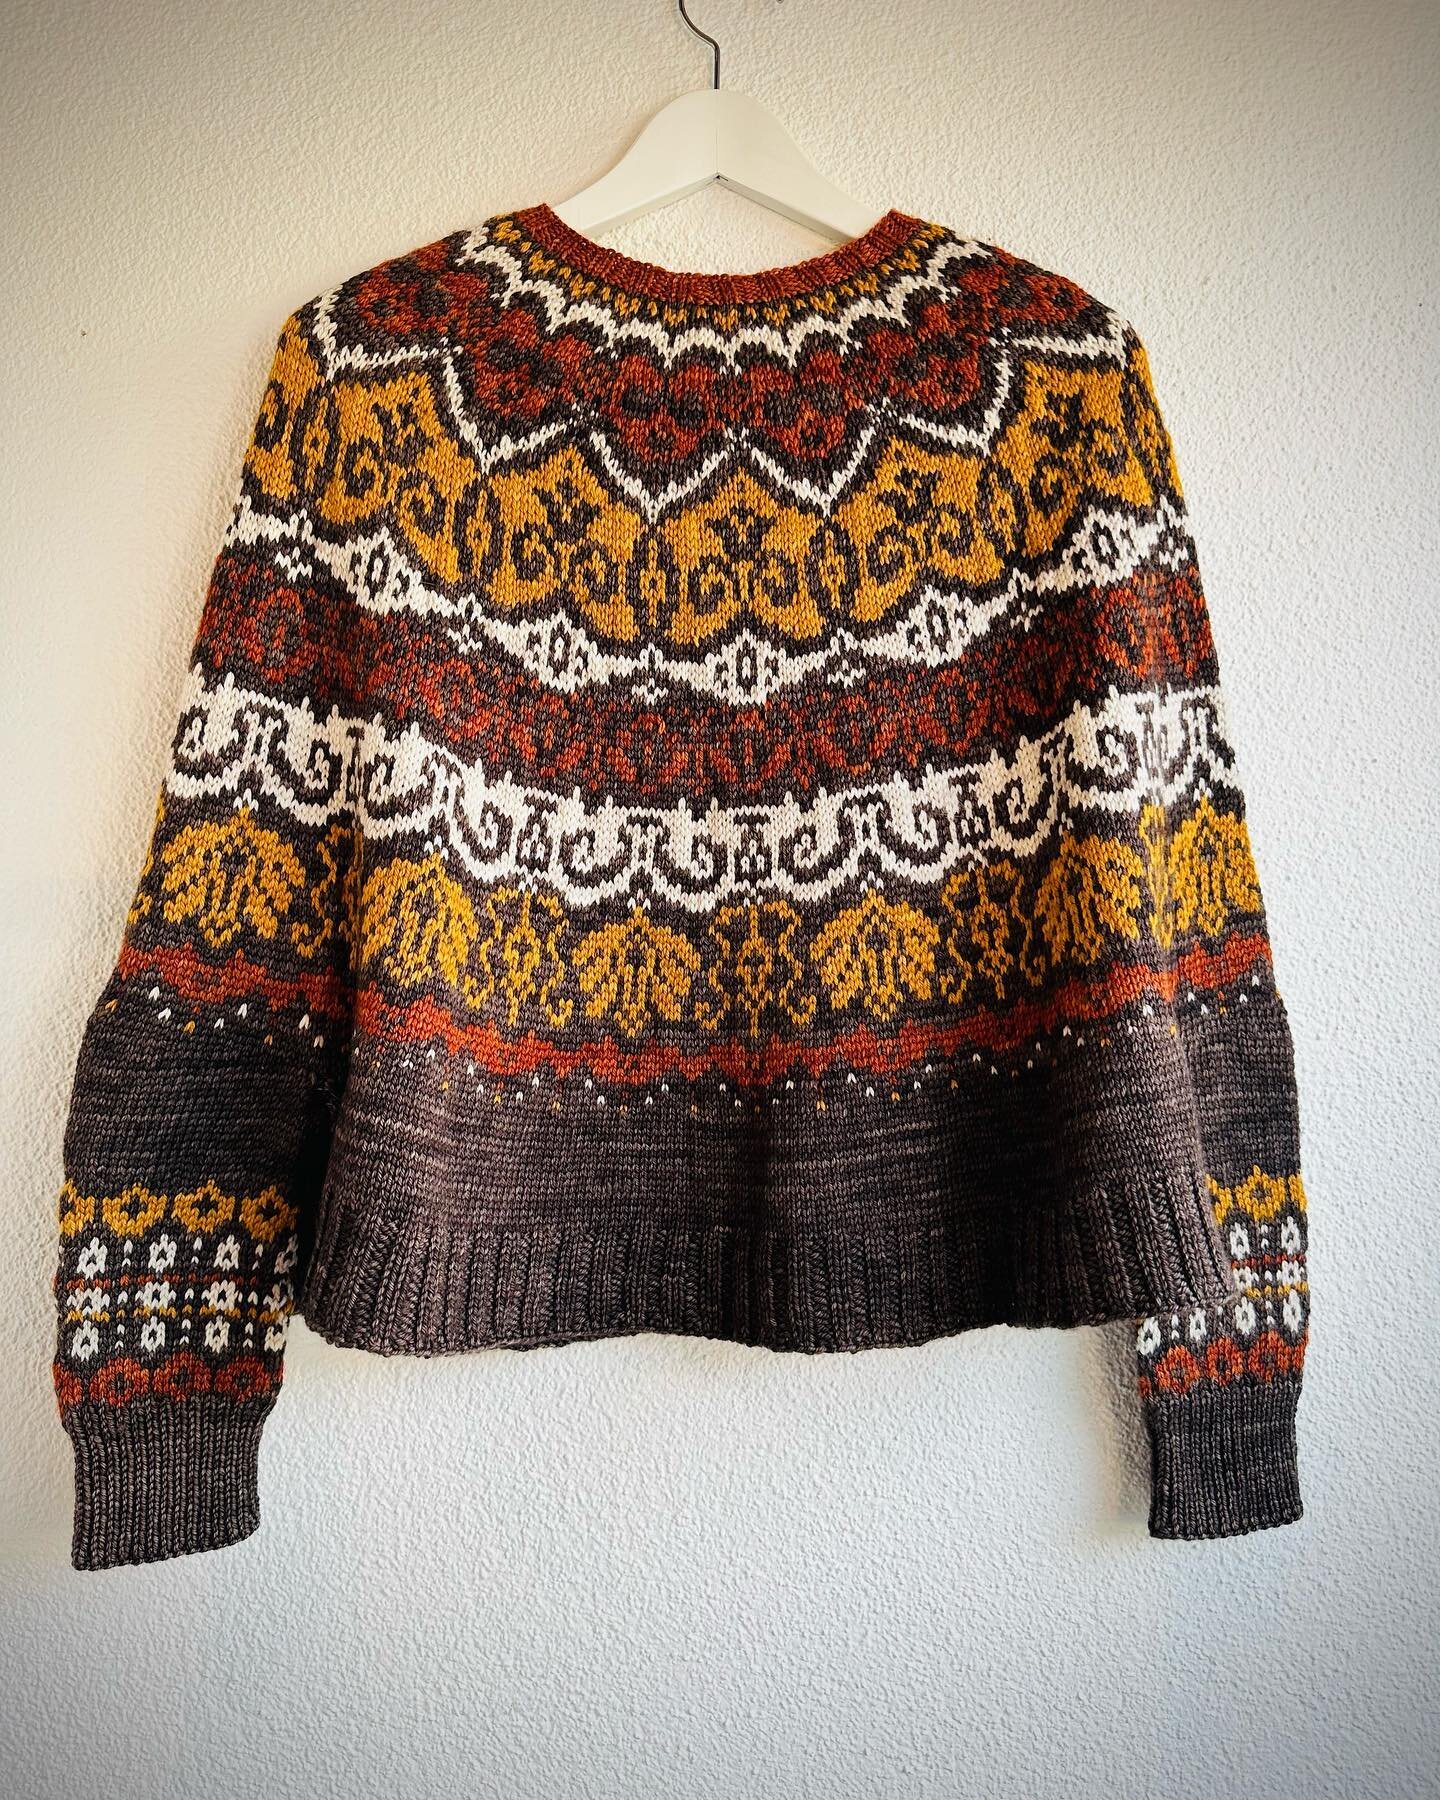 Cottage Swoncho
by Olga Putano

I have been waiting to wear this since it was being knitted up by @joniwebster for me earlier this year. Isn&rsquo;t this swoncho great? I needed one of these in my wardrobe; some-thing to toss over a tee in this type 